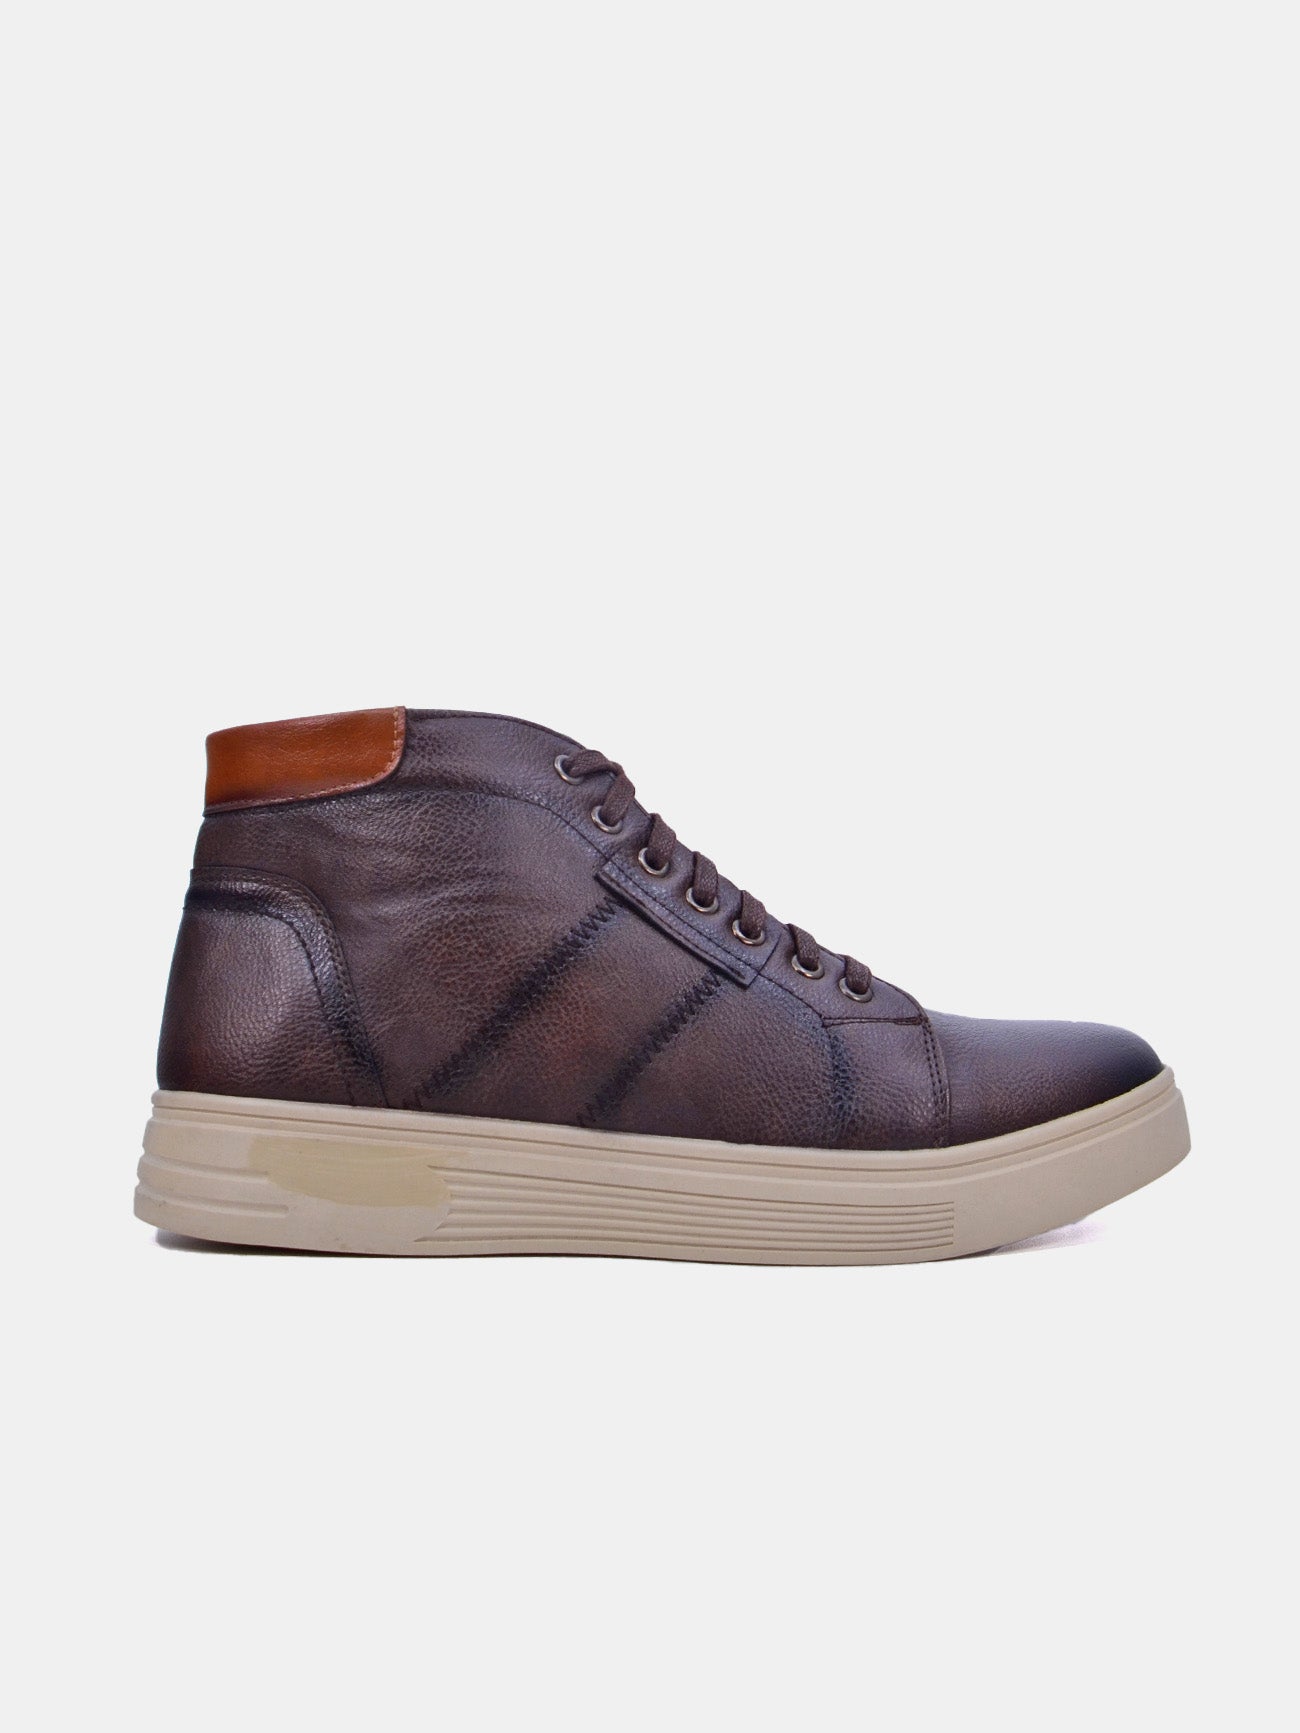 Marco Oglo MC388 Mens Casual Shoes